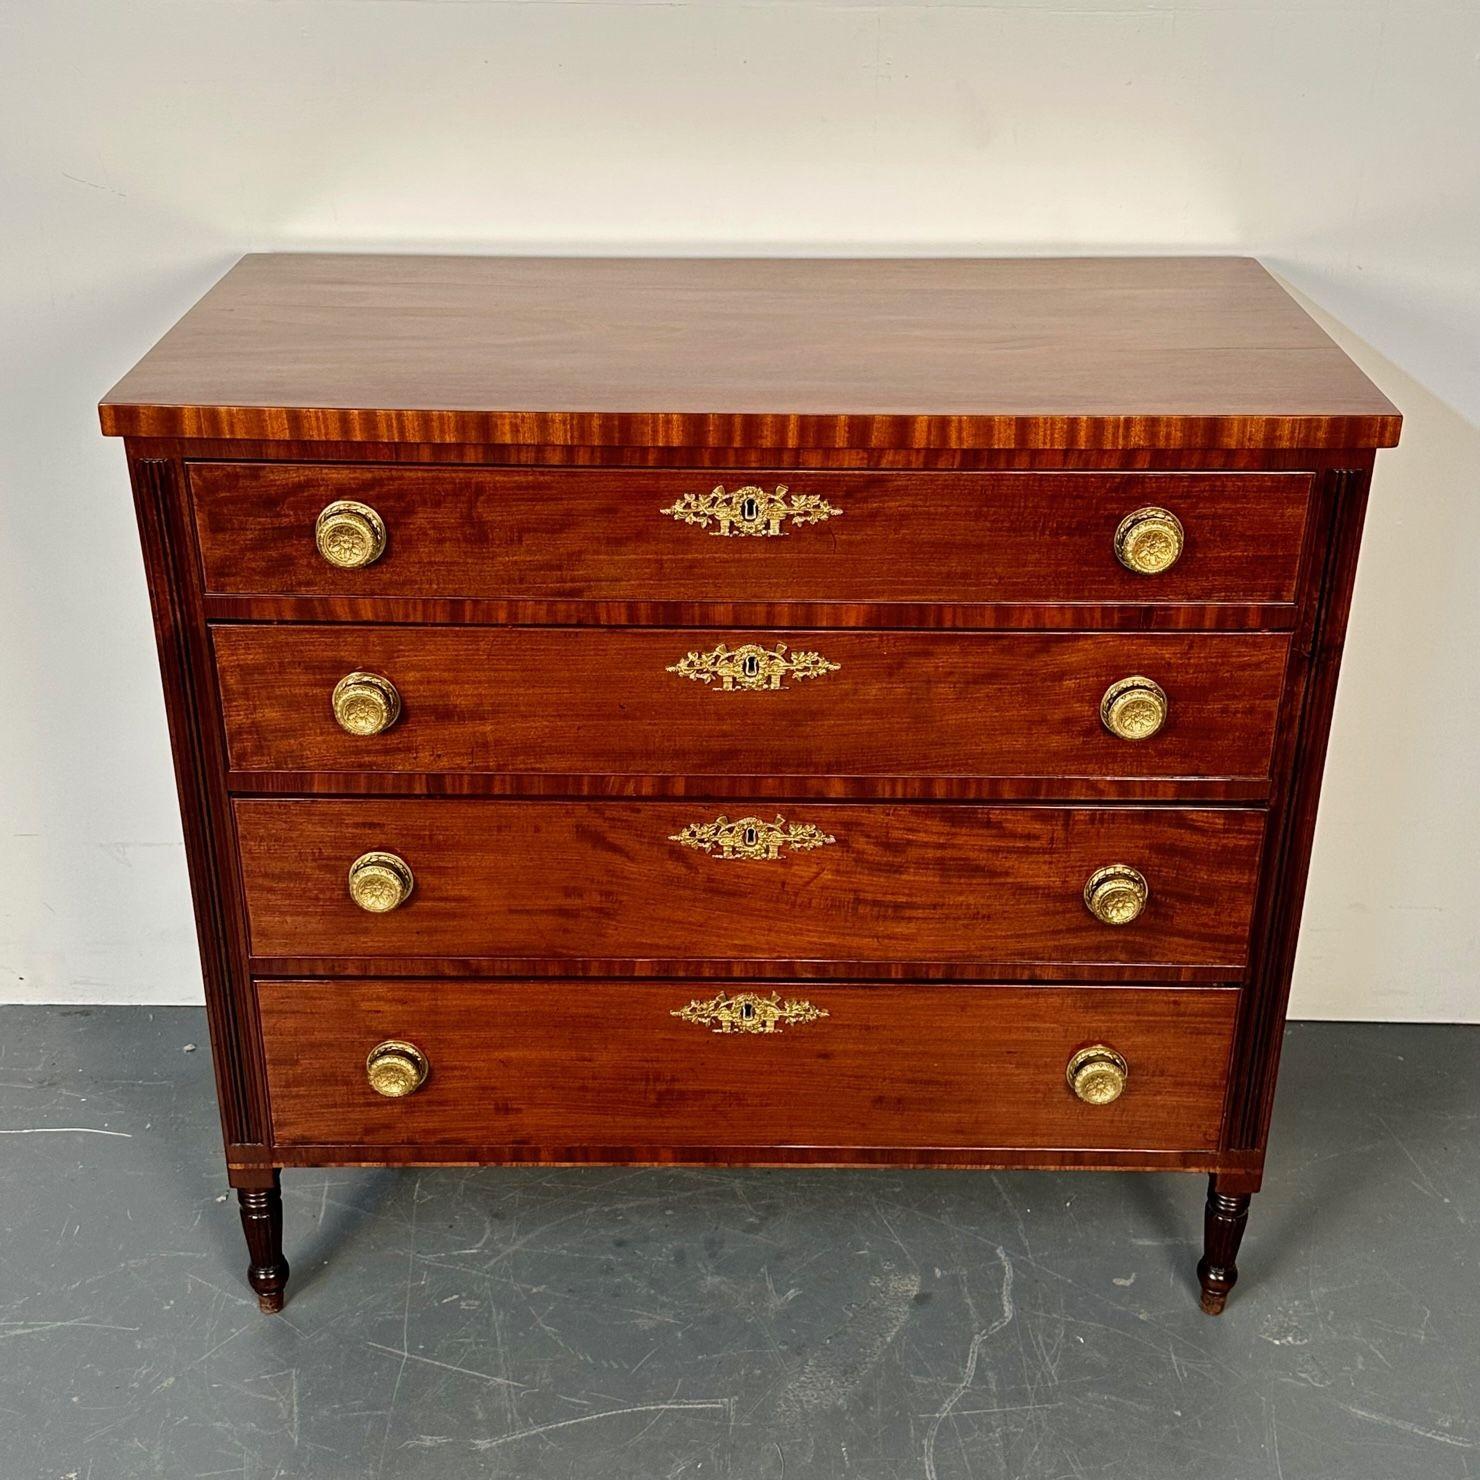 Polished 18th/19th Century Mahogany Chest, Dresser or Commode, Bronze Accents
 
Wonderfully polished having spindle legs leading to a group of four graduating drawers all with dore' bronze pulls and key hold mounts. The interior having finely